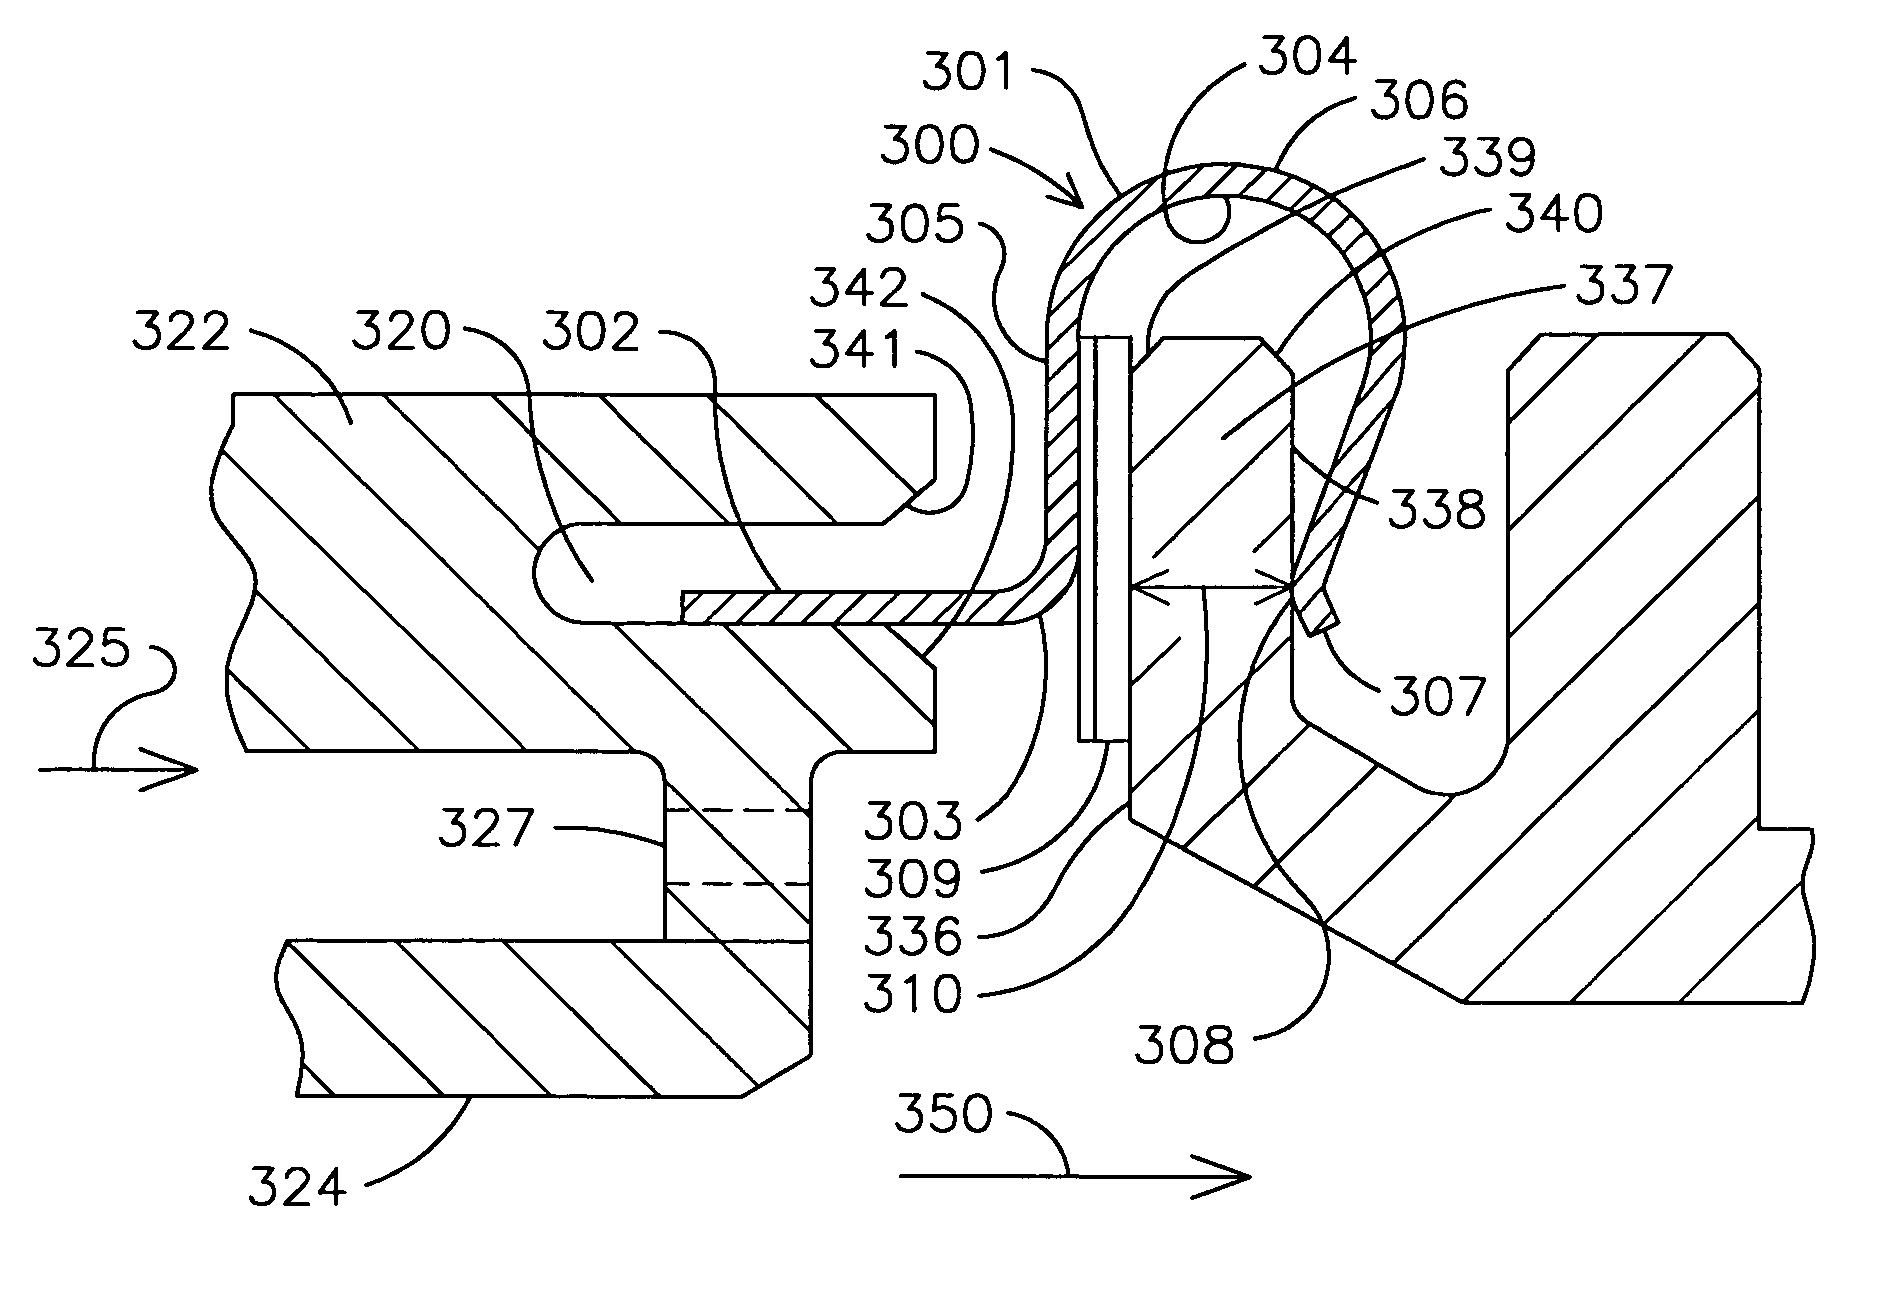 Slidable spring-loaded transition-to-turbine seal apparatus and heat-shielding system, comprising the seal, at transition/turbine junction of a gas turbine engine